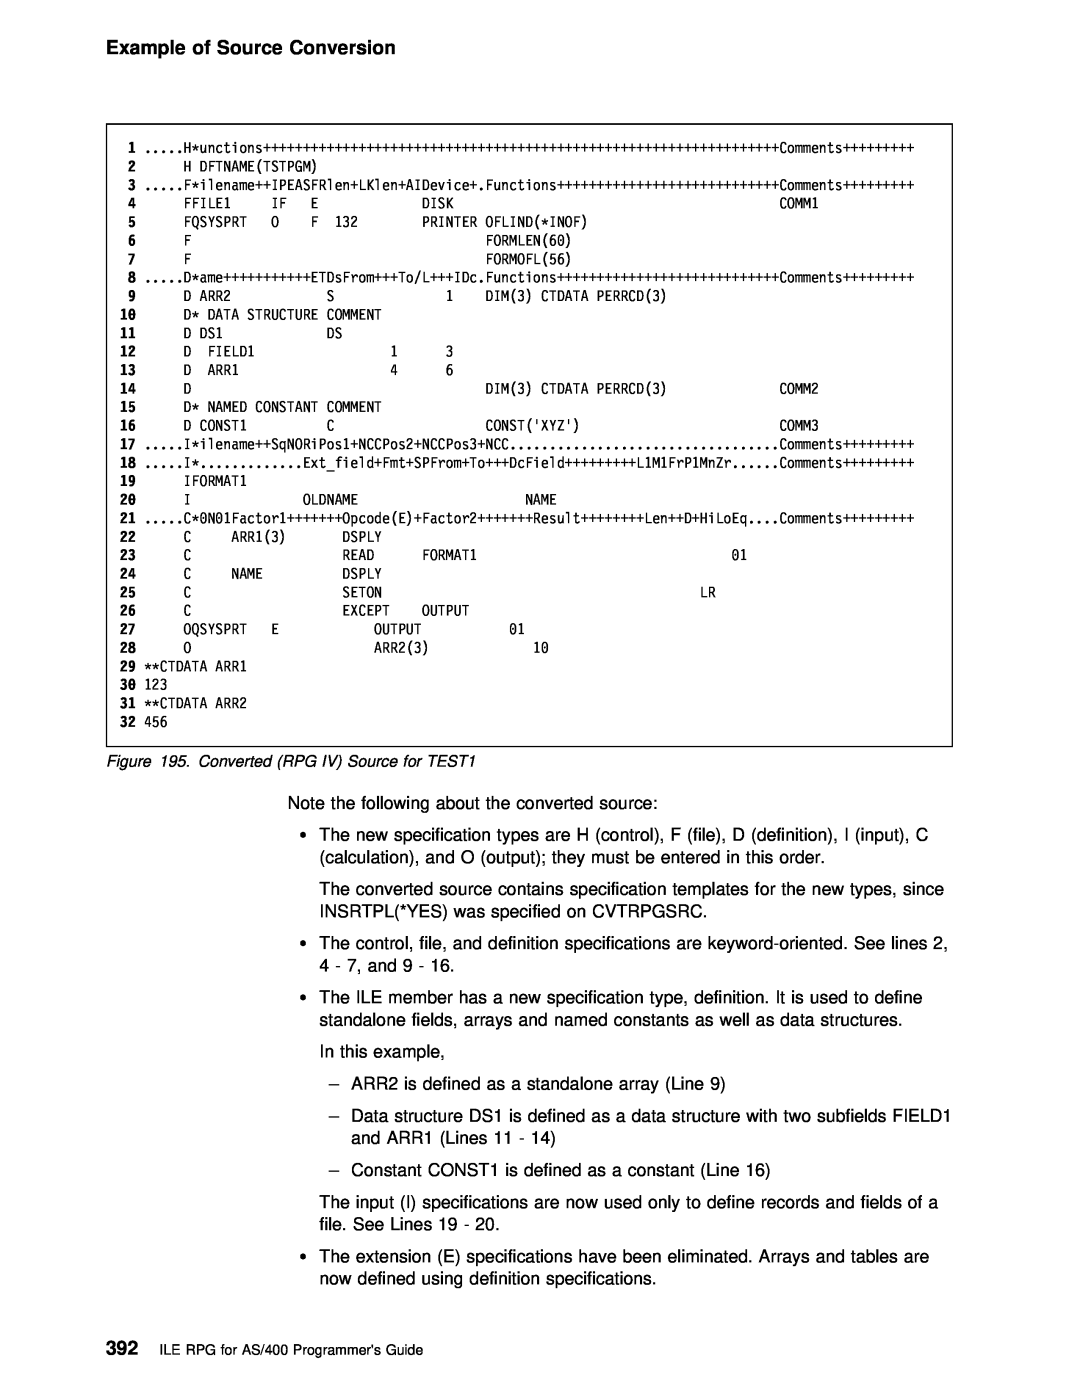 IBM AS/400 manual Example of Source Conversion, Converted RPG IV Source for TEST1, ARR1 